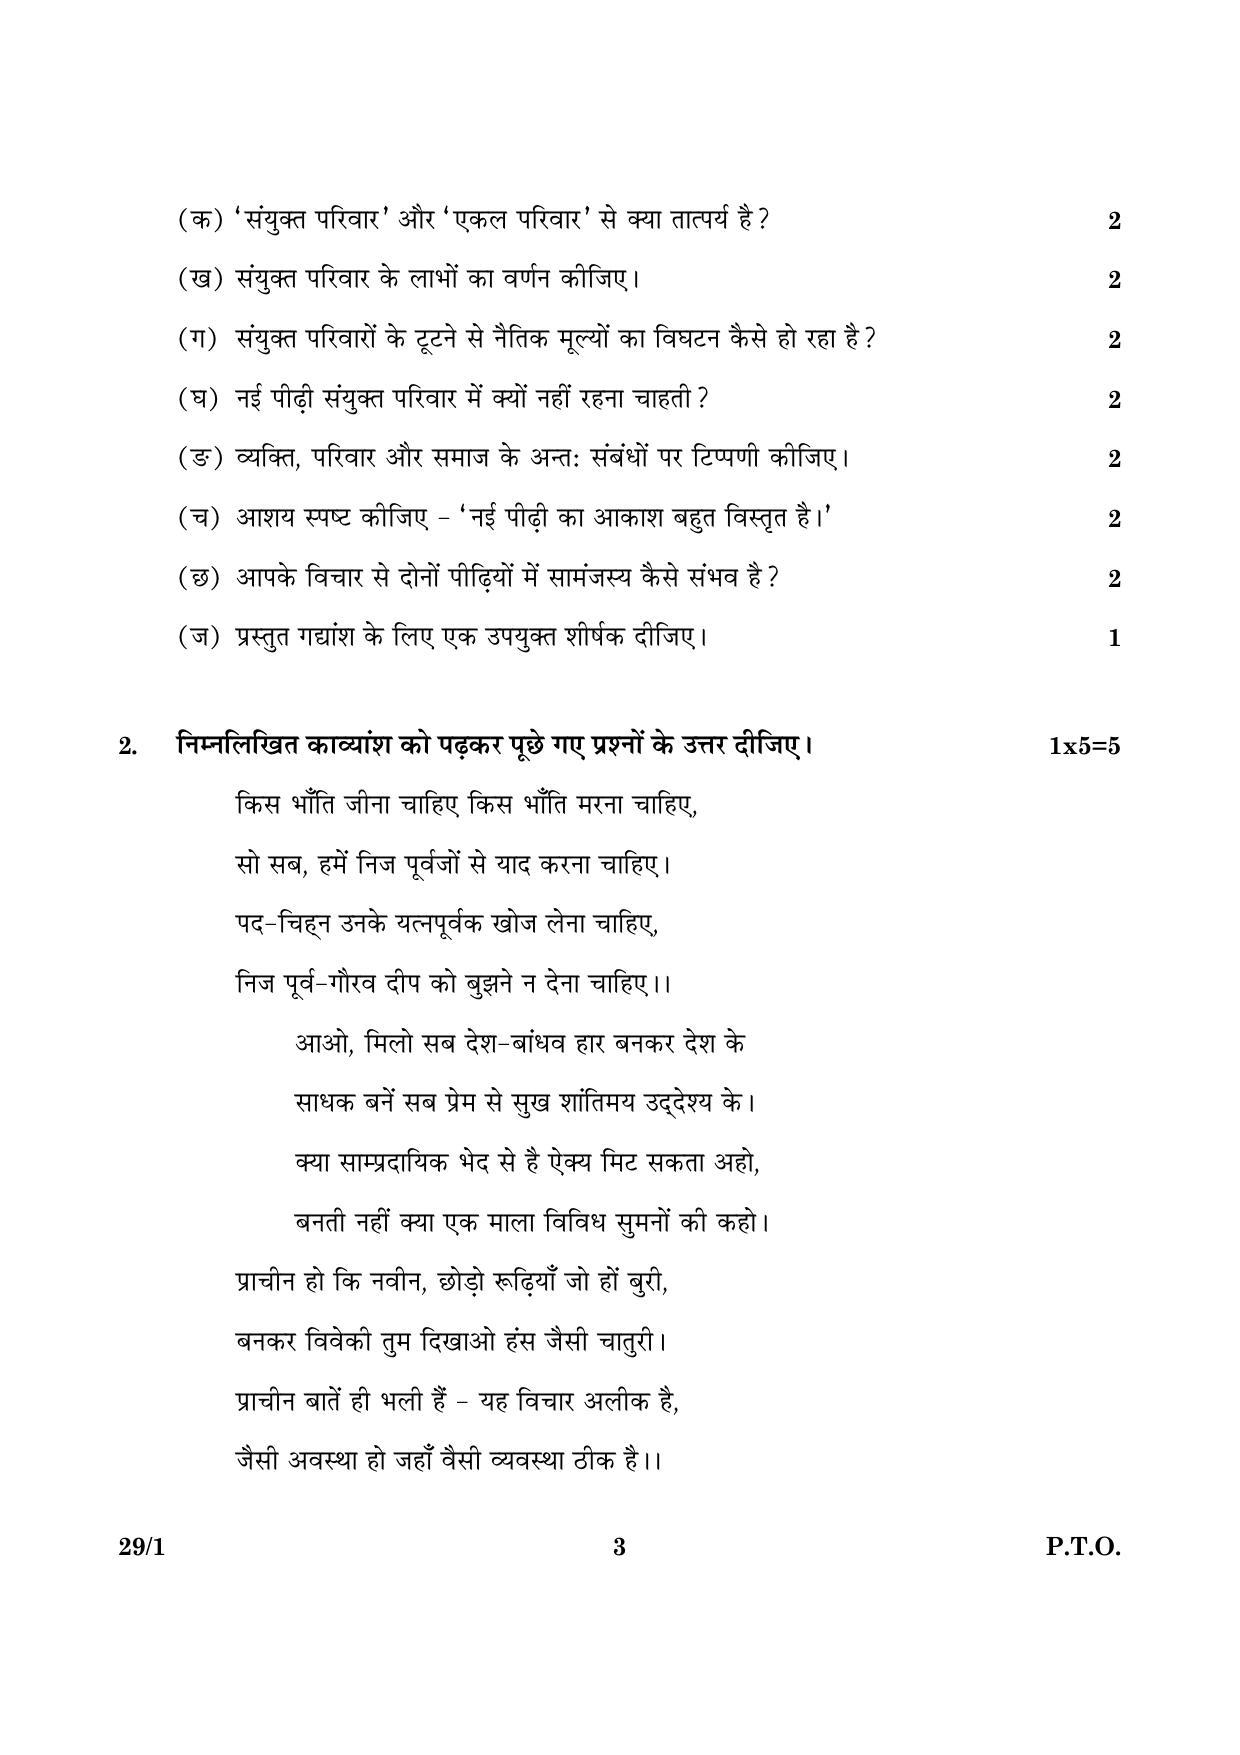 CBSE Class 12 029 Set 1 Hindi Elective 2016 Question Paper - Page 3